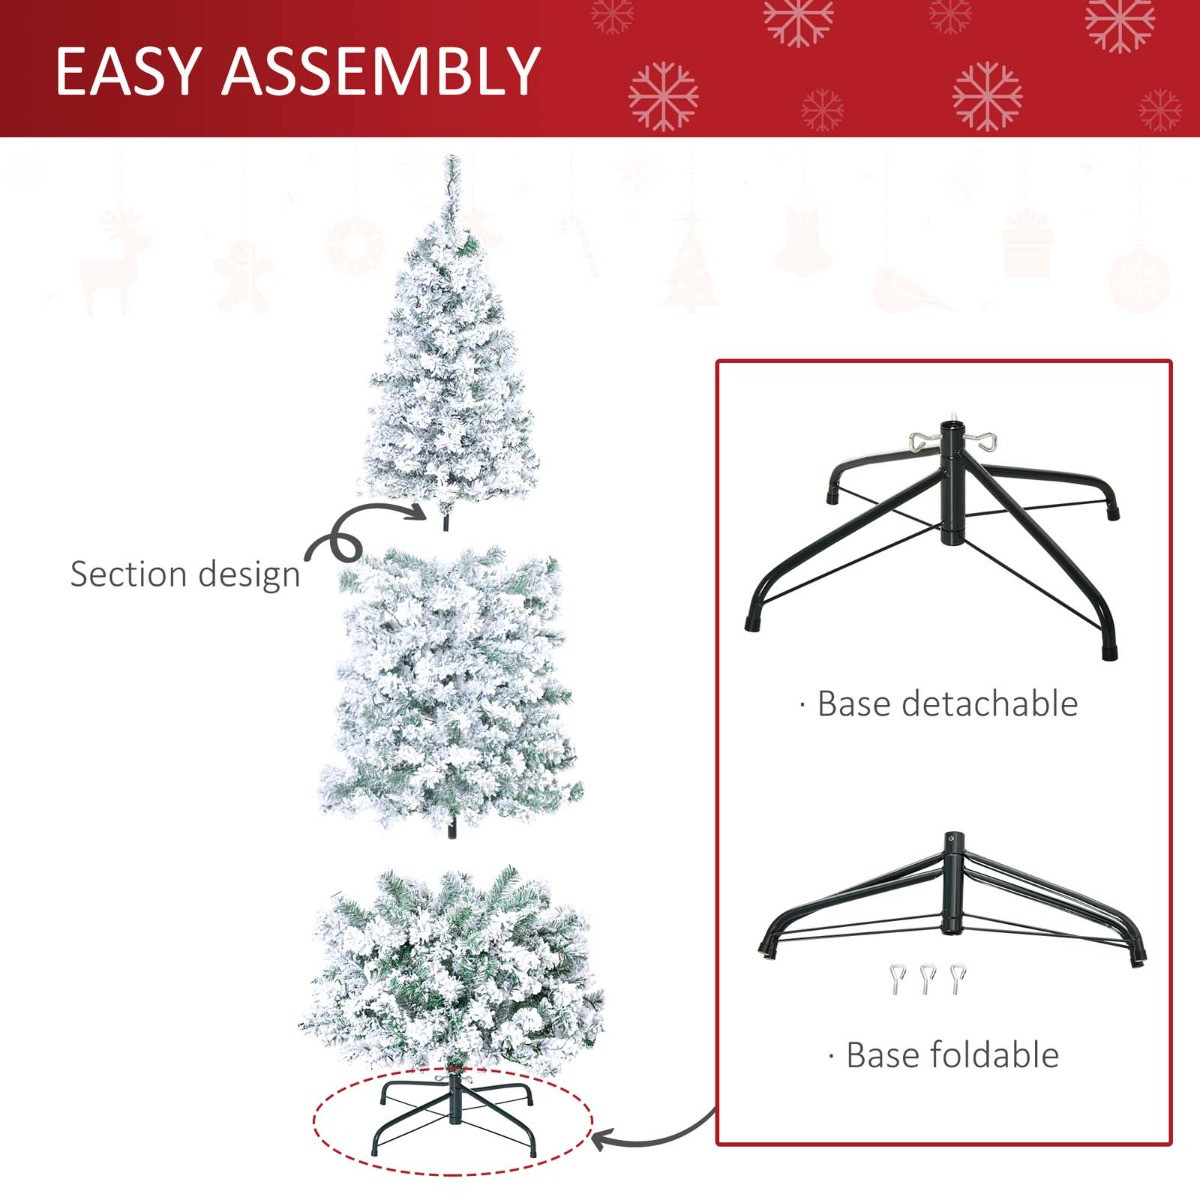 OHS Pre-Lit Artificial Snow Flocked Christmas Tree With Warm LED Lights, Green/White - 6ft>